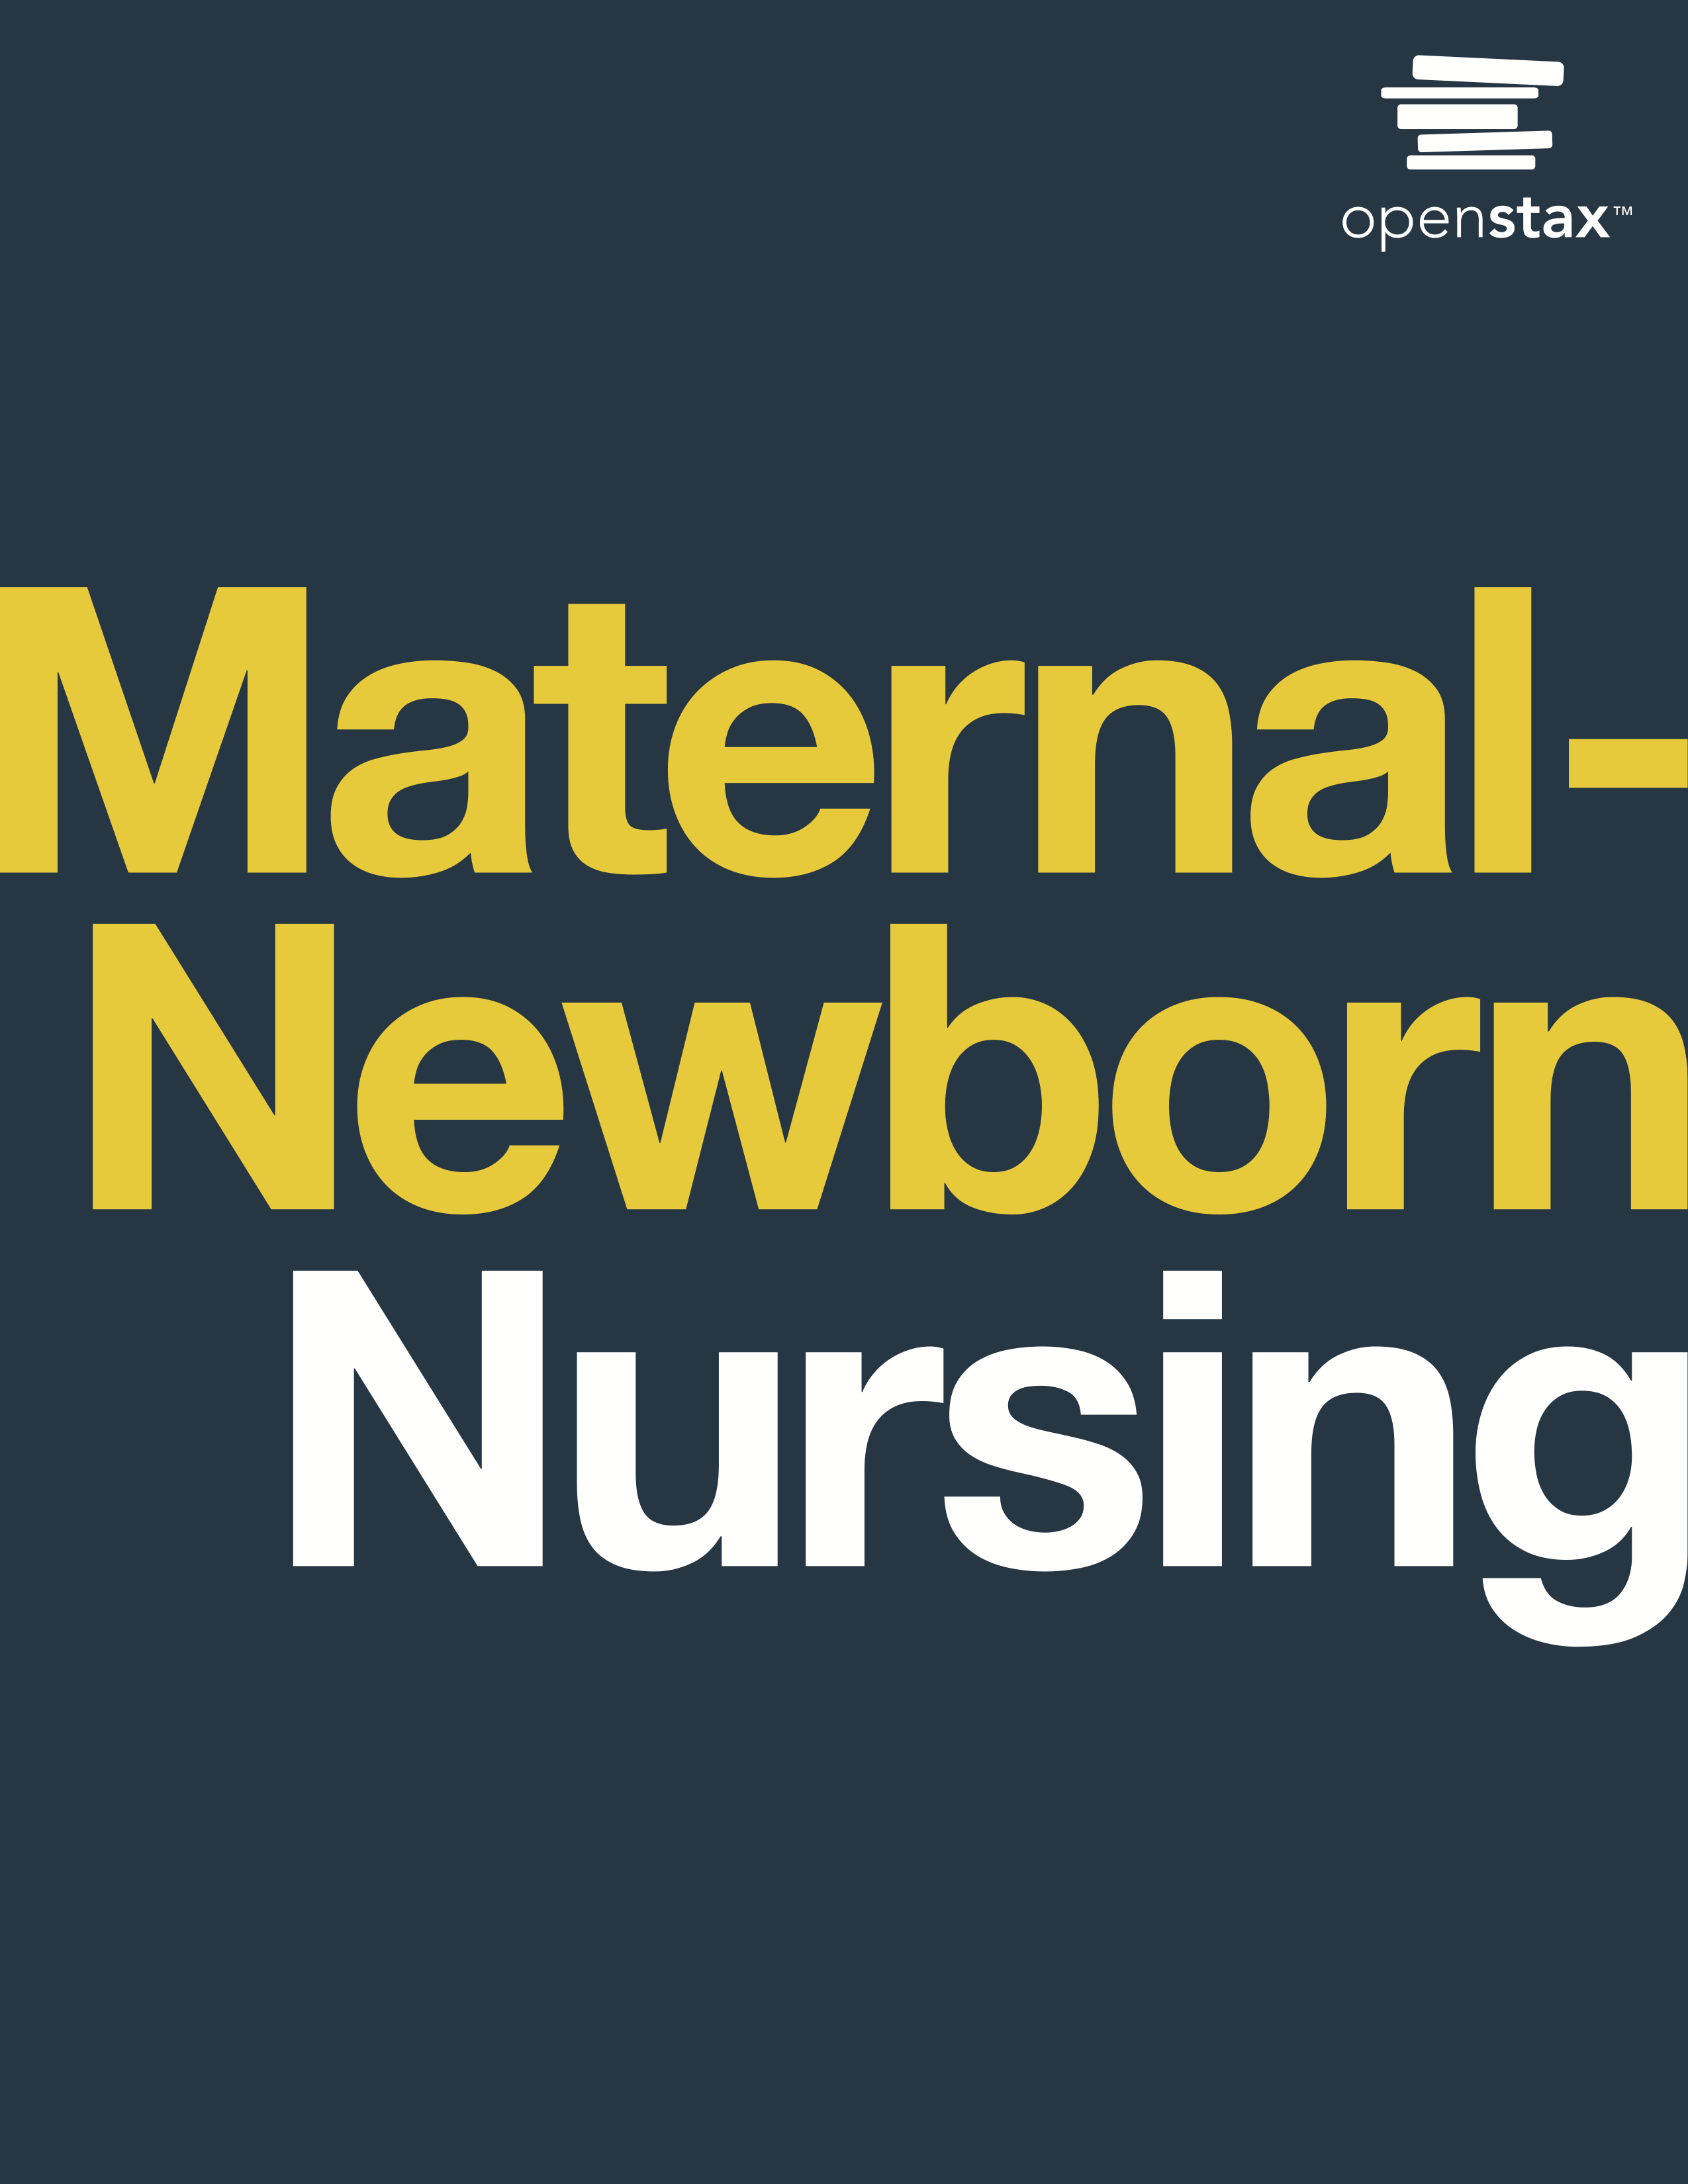 OpenStax Textbook Cover: White and yellow text on navy blue background. Text: Maternal-Newborn Nursing